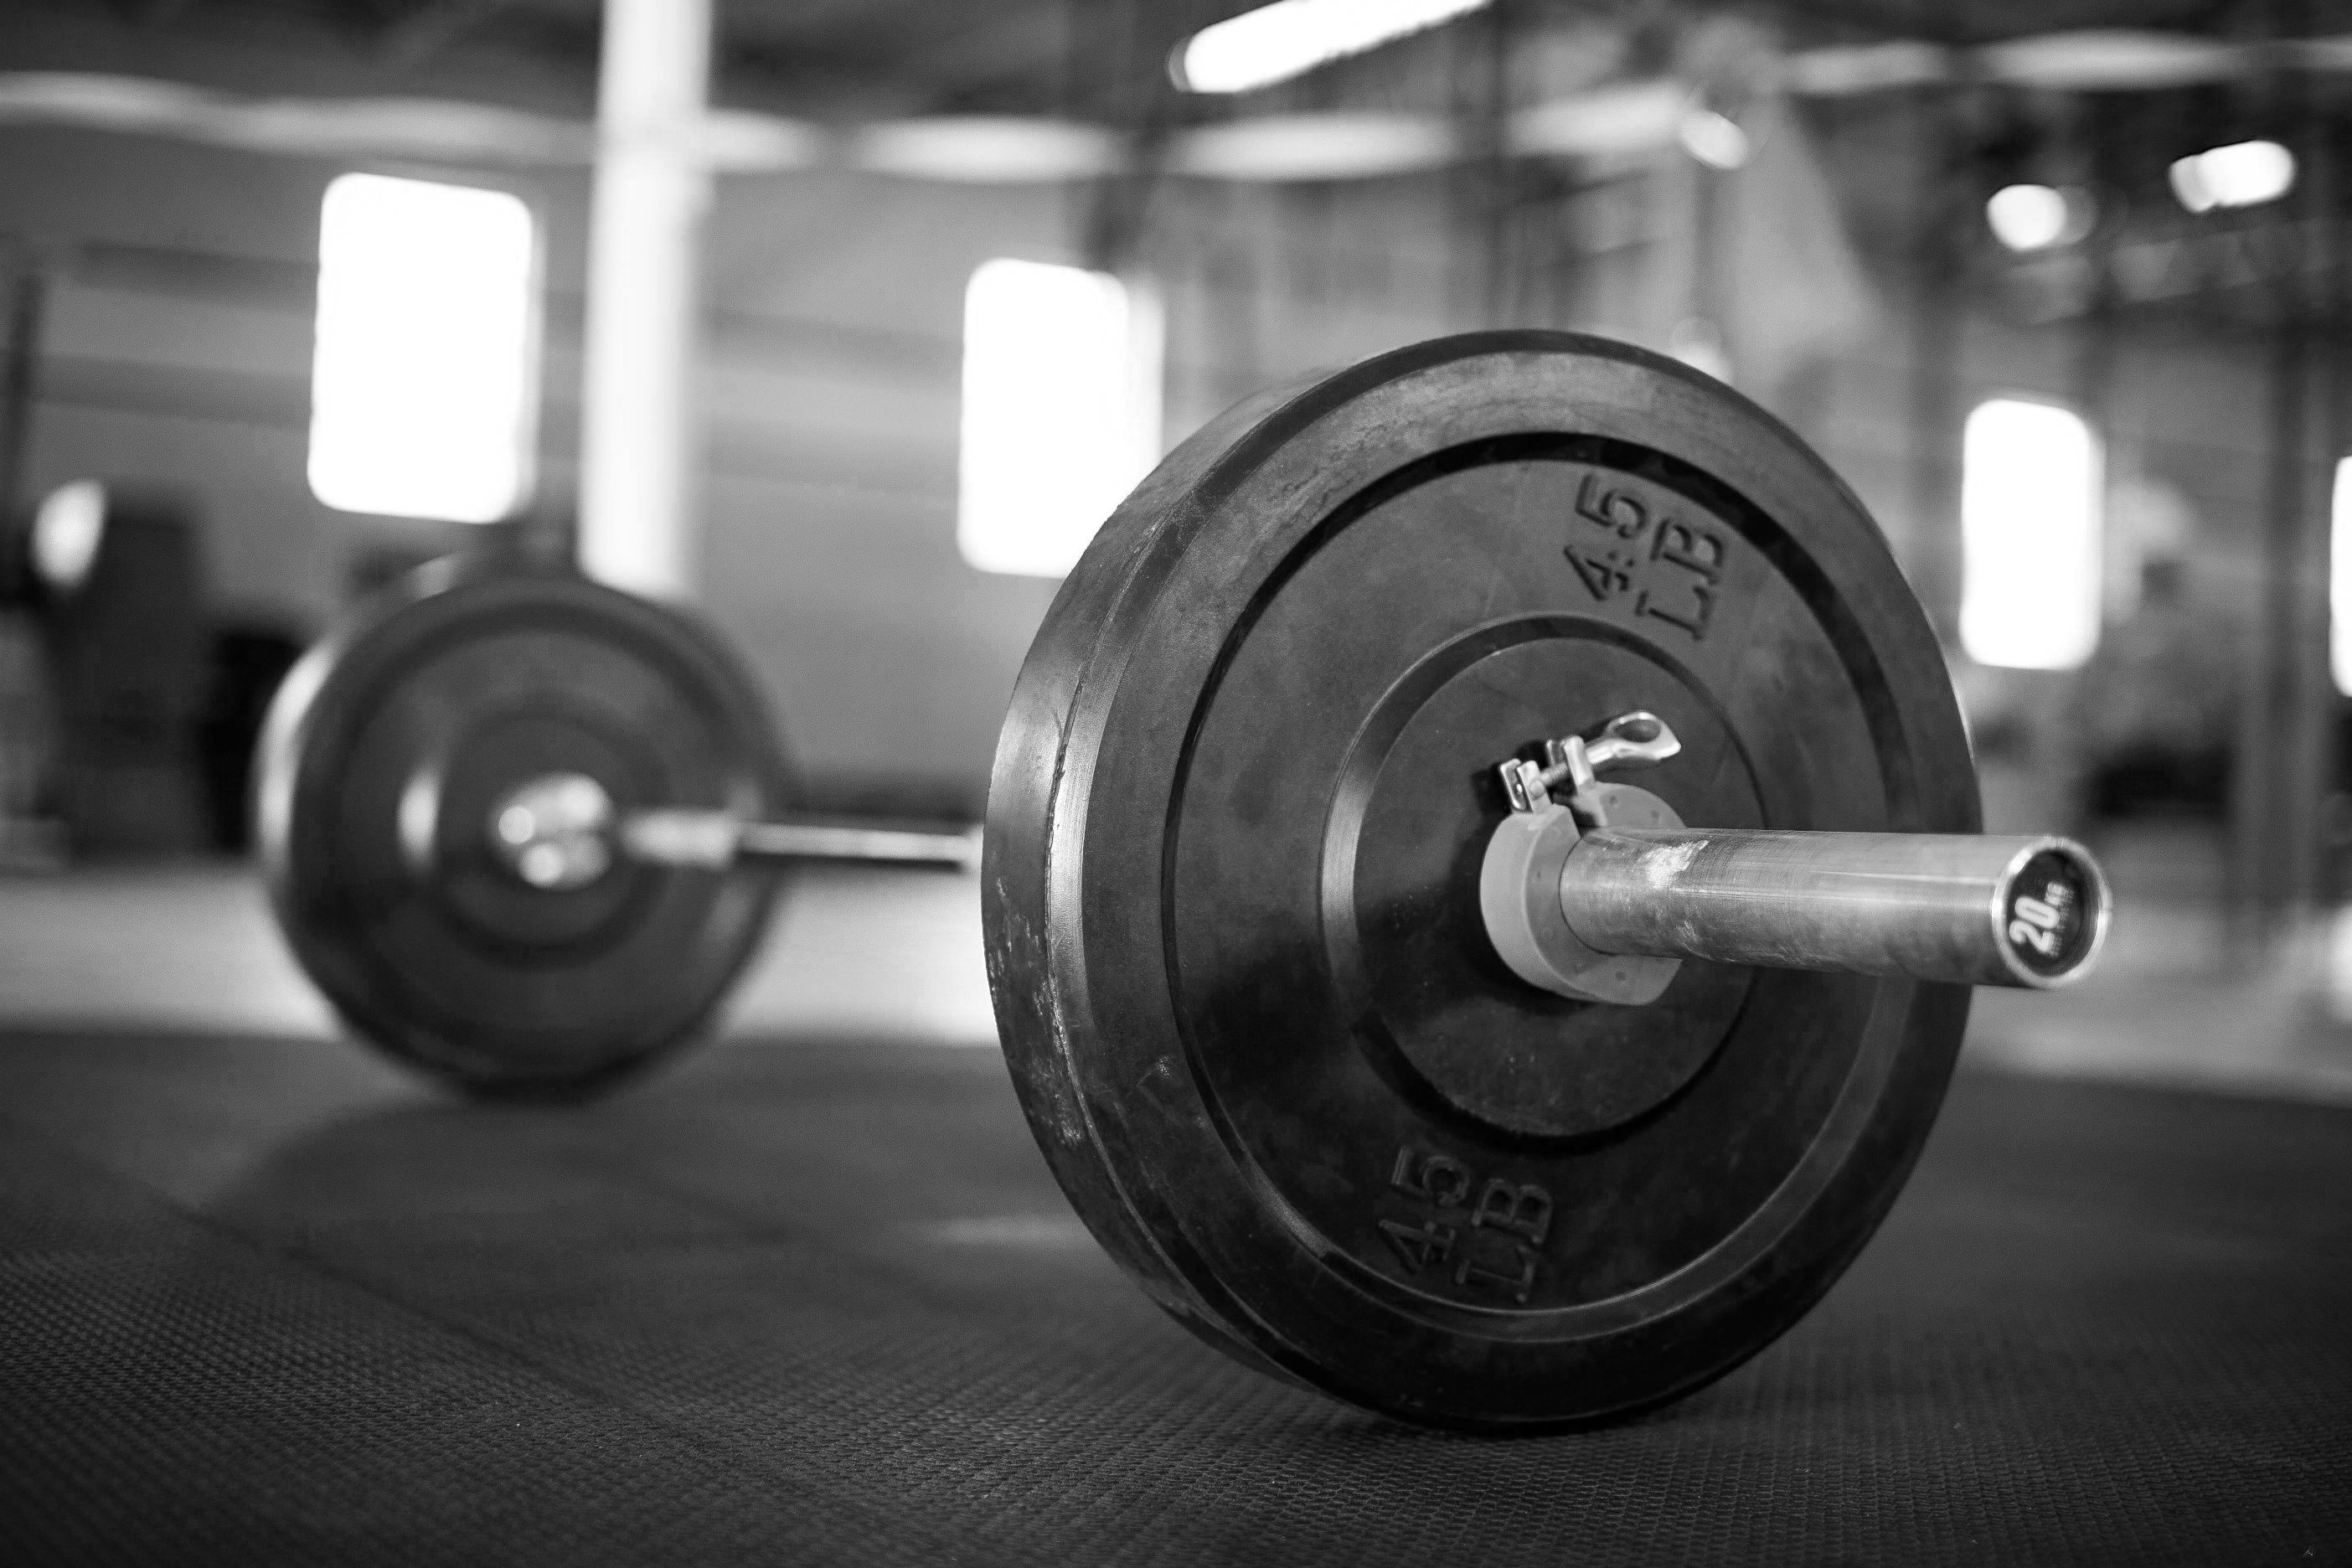 2808x1872 Fitness Weights Wallpapers Top Free Fitness Weights Backgrounds